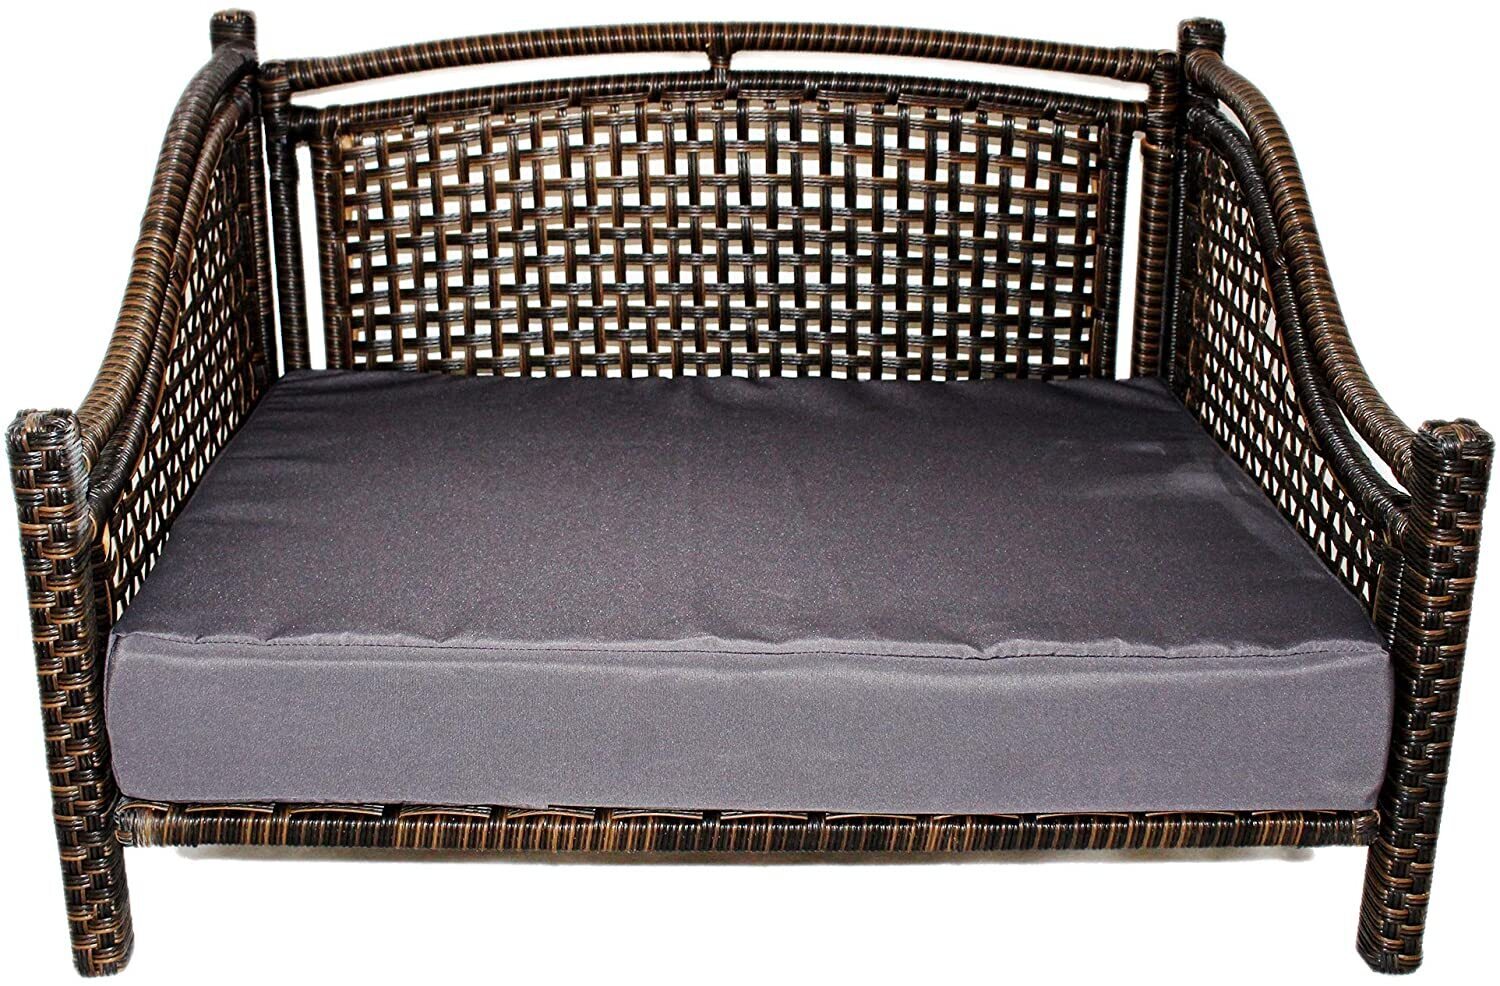 Woven Rattan Bed With Foam Padding 